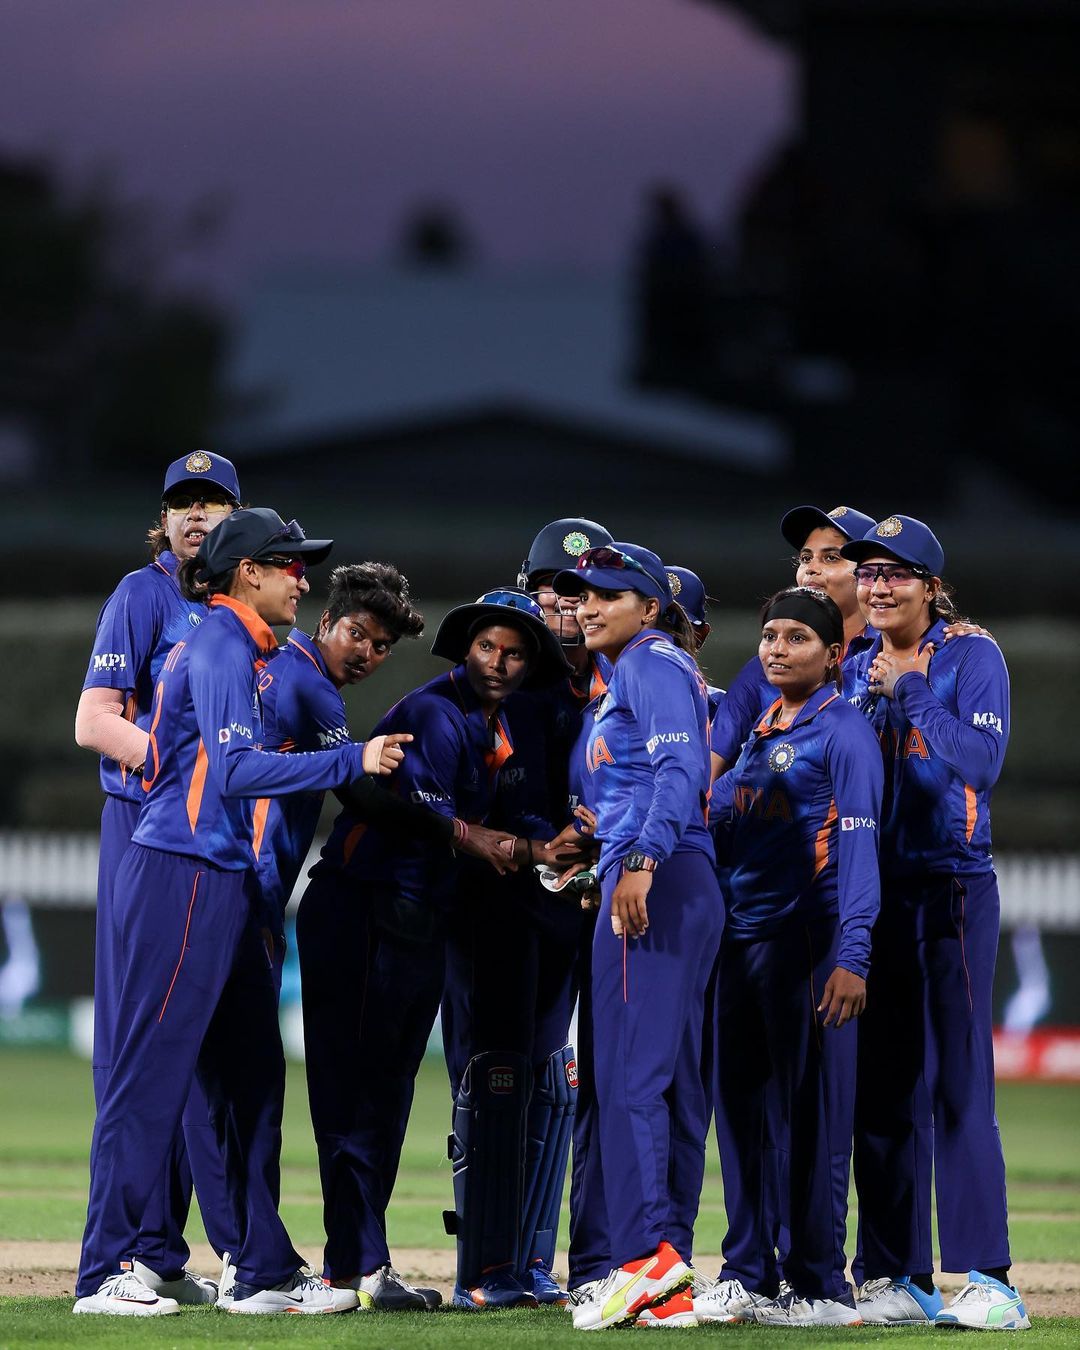 Women’s cricket at CWG:  India vs Australia stats, squads, and pitch report